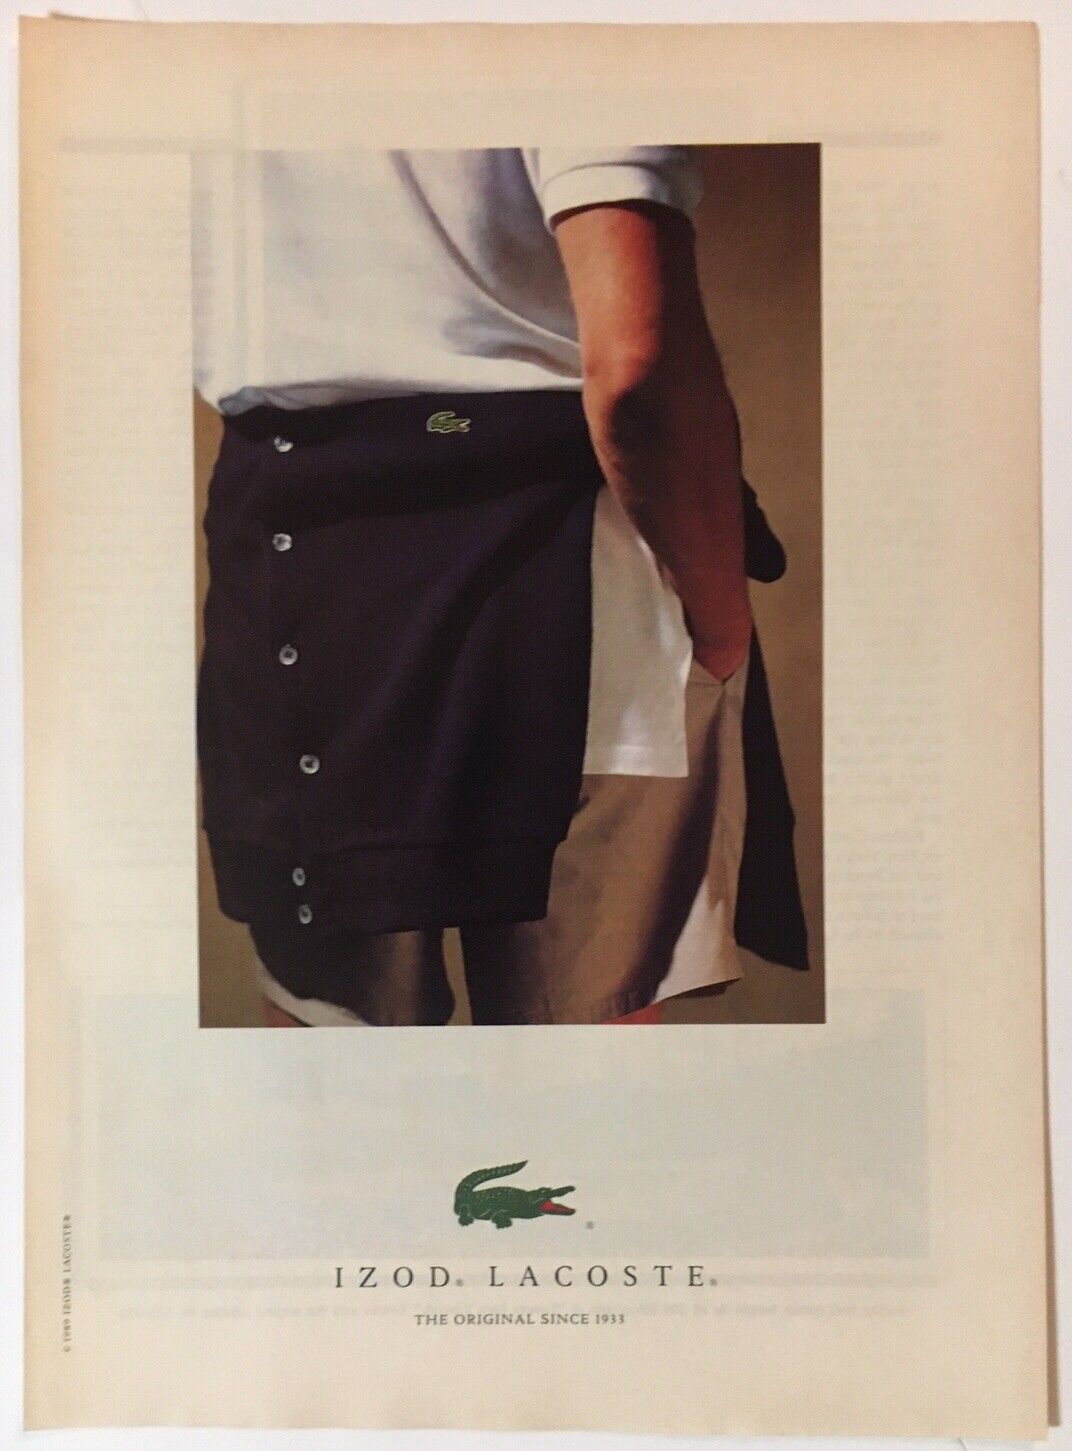 Izod Lacoste Clothing 1989 Vintage Print Ad 8x11 Inches Wall Decor